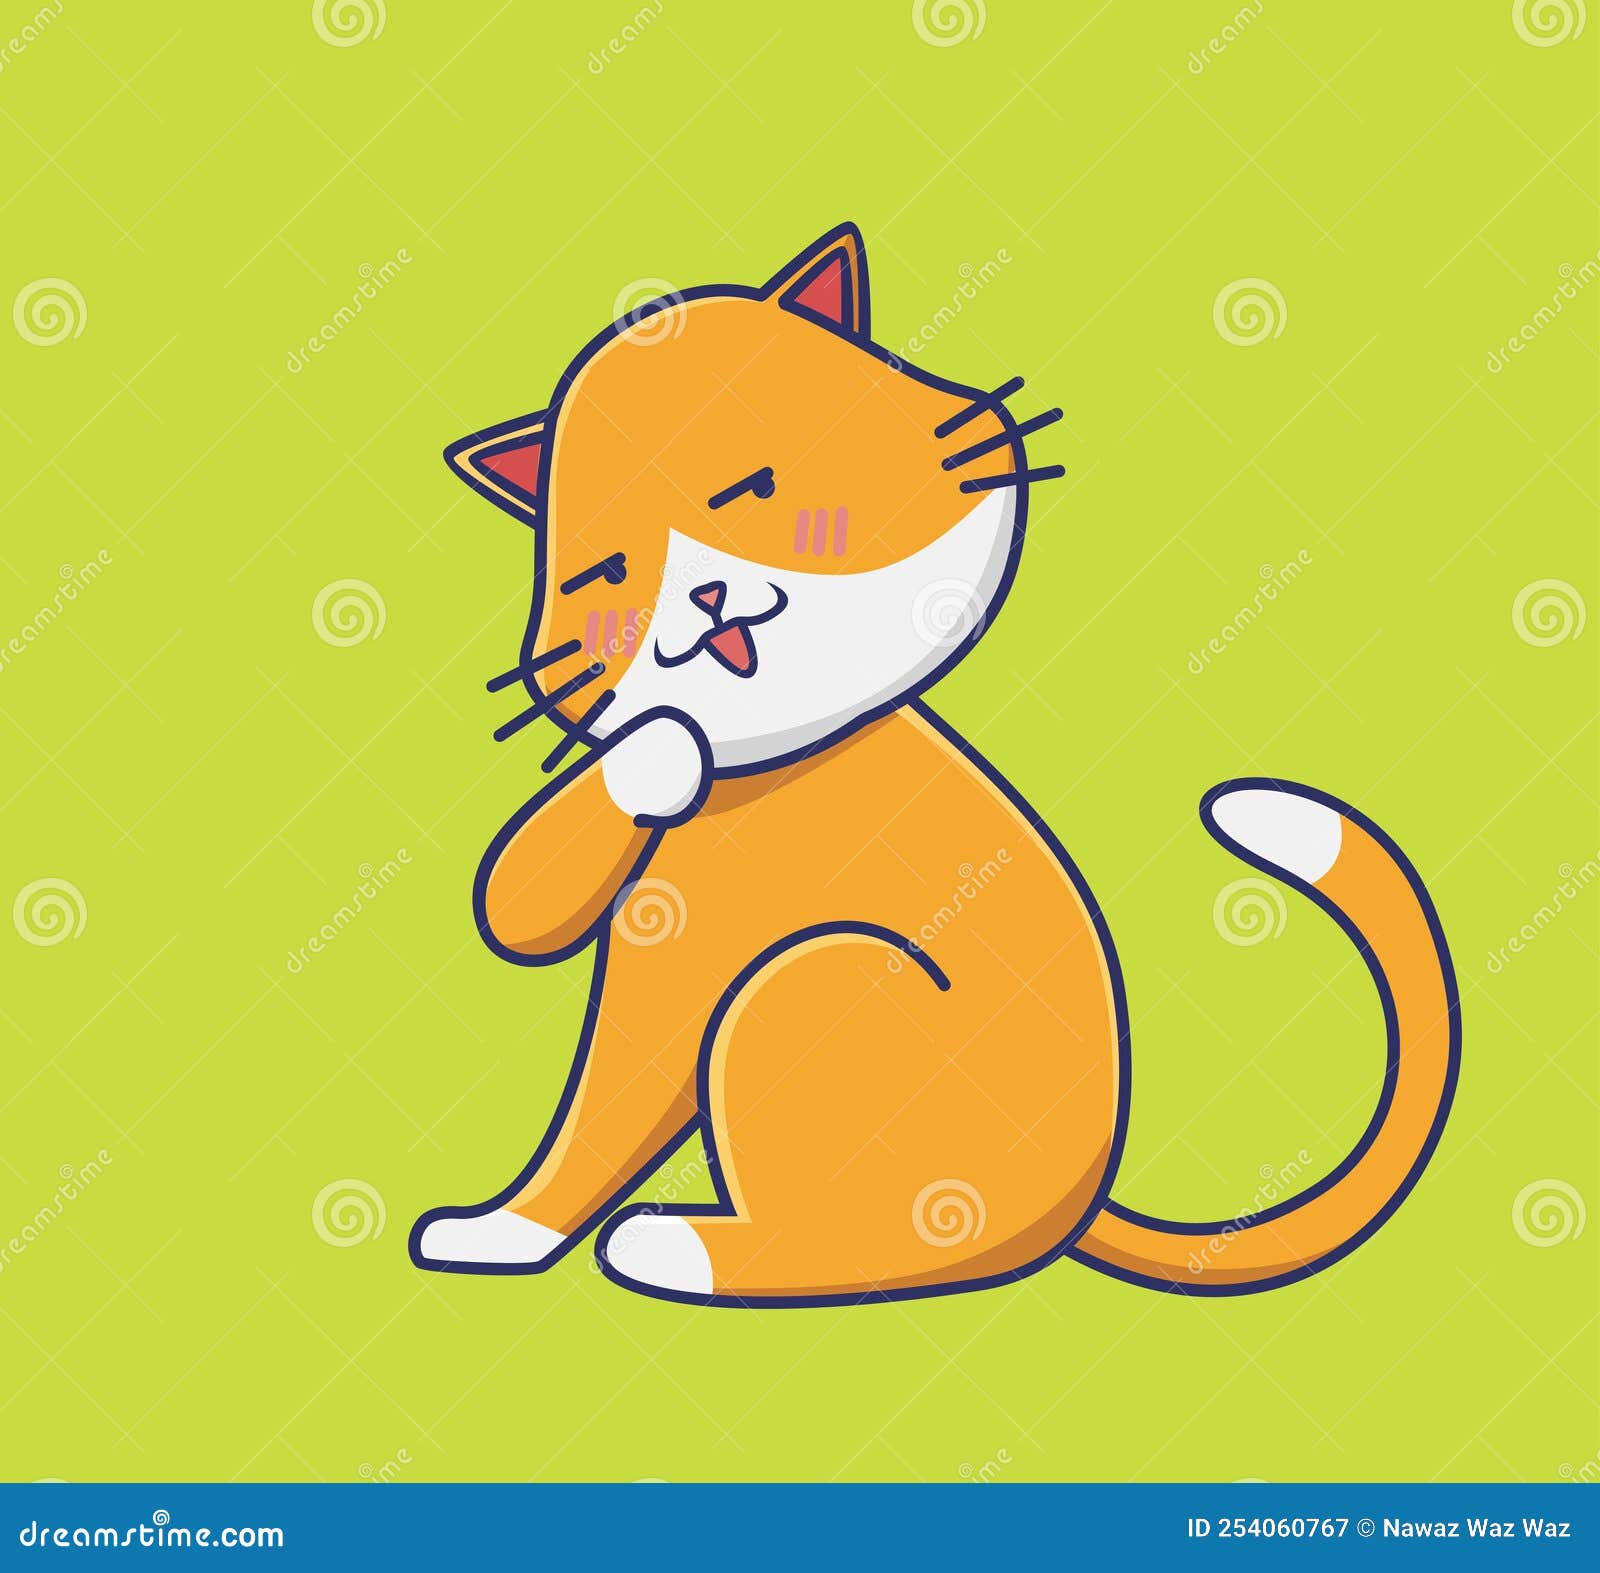 Premium Vector  Cat icon in cartoon style isolated on white